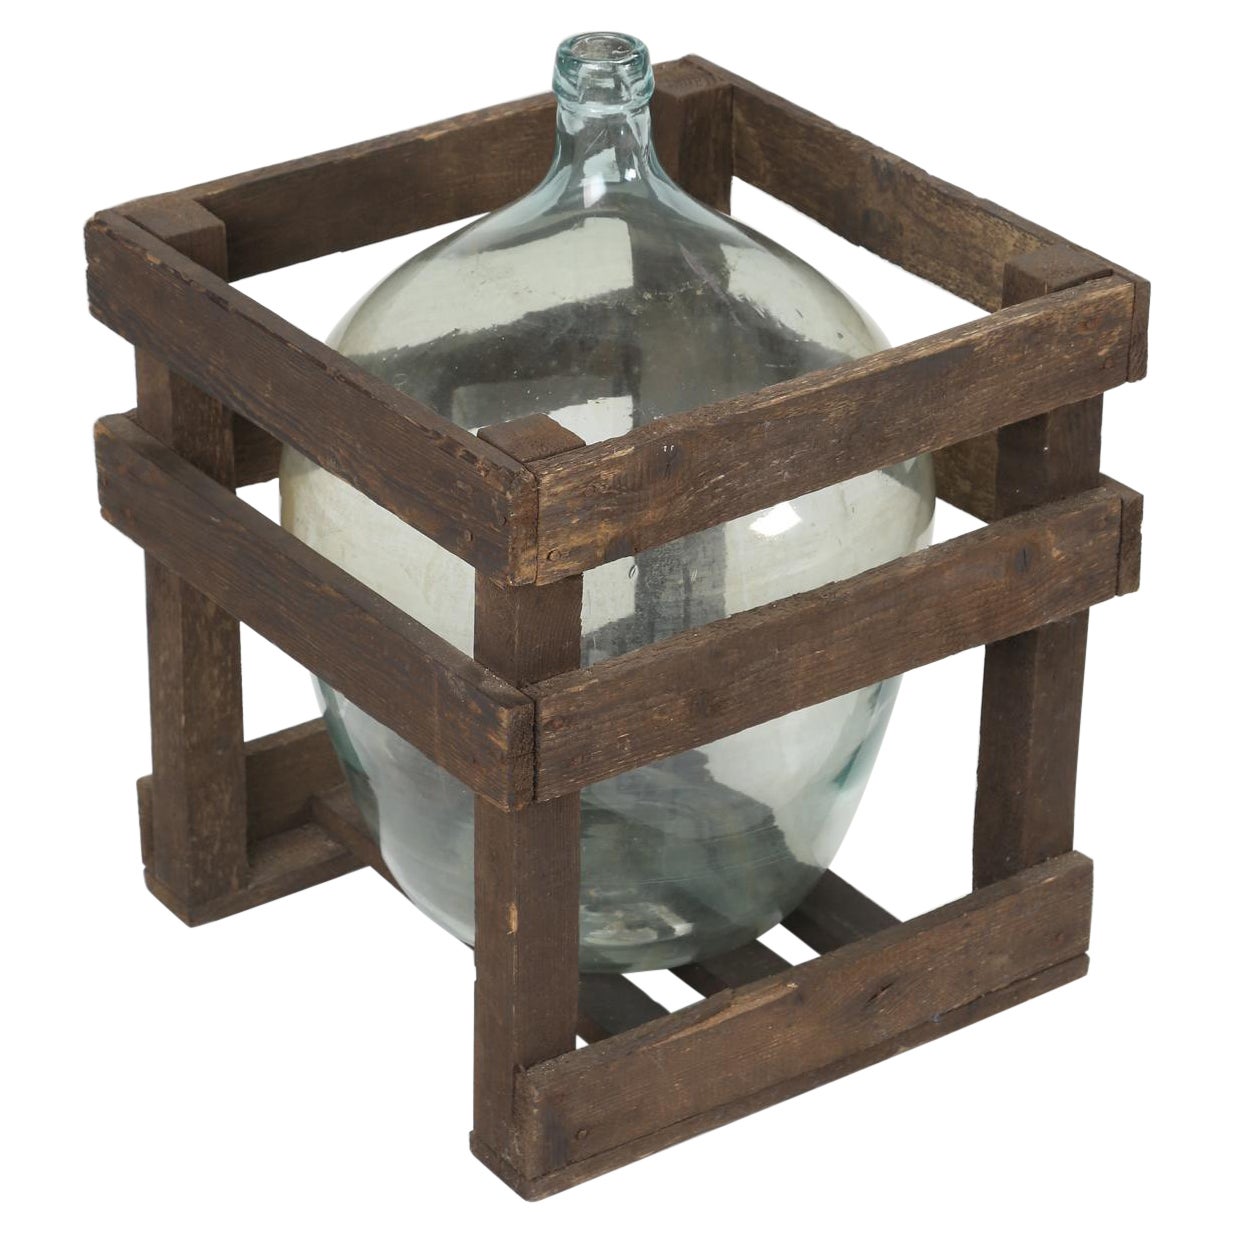 Demijohn or Carboy Glass Bottle in the Original Wooden Crate For Sale